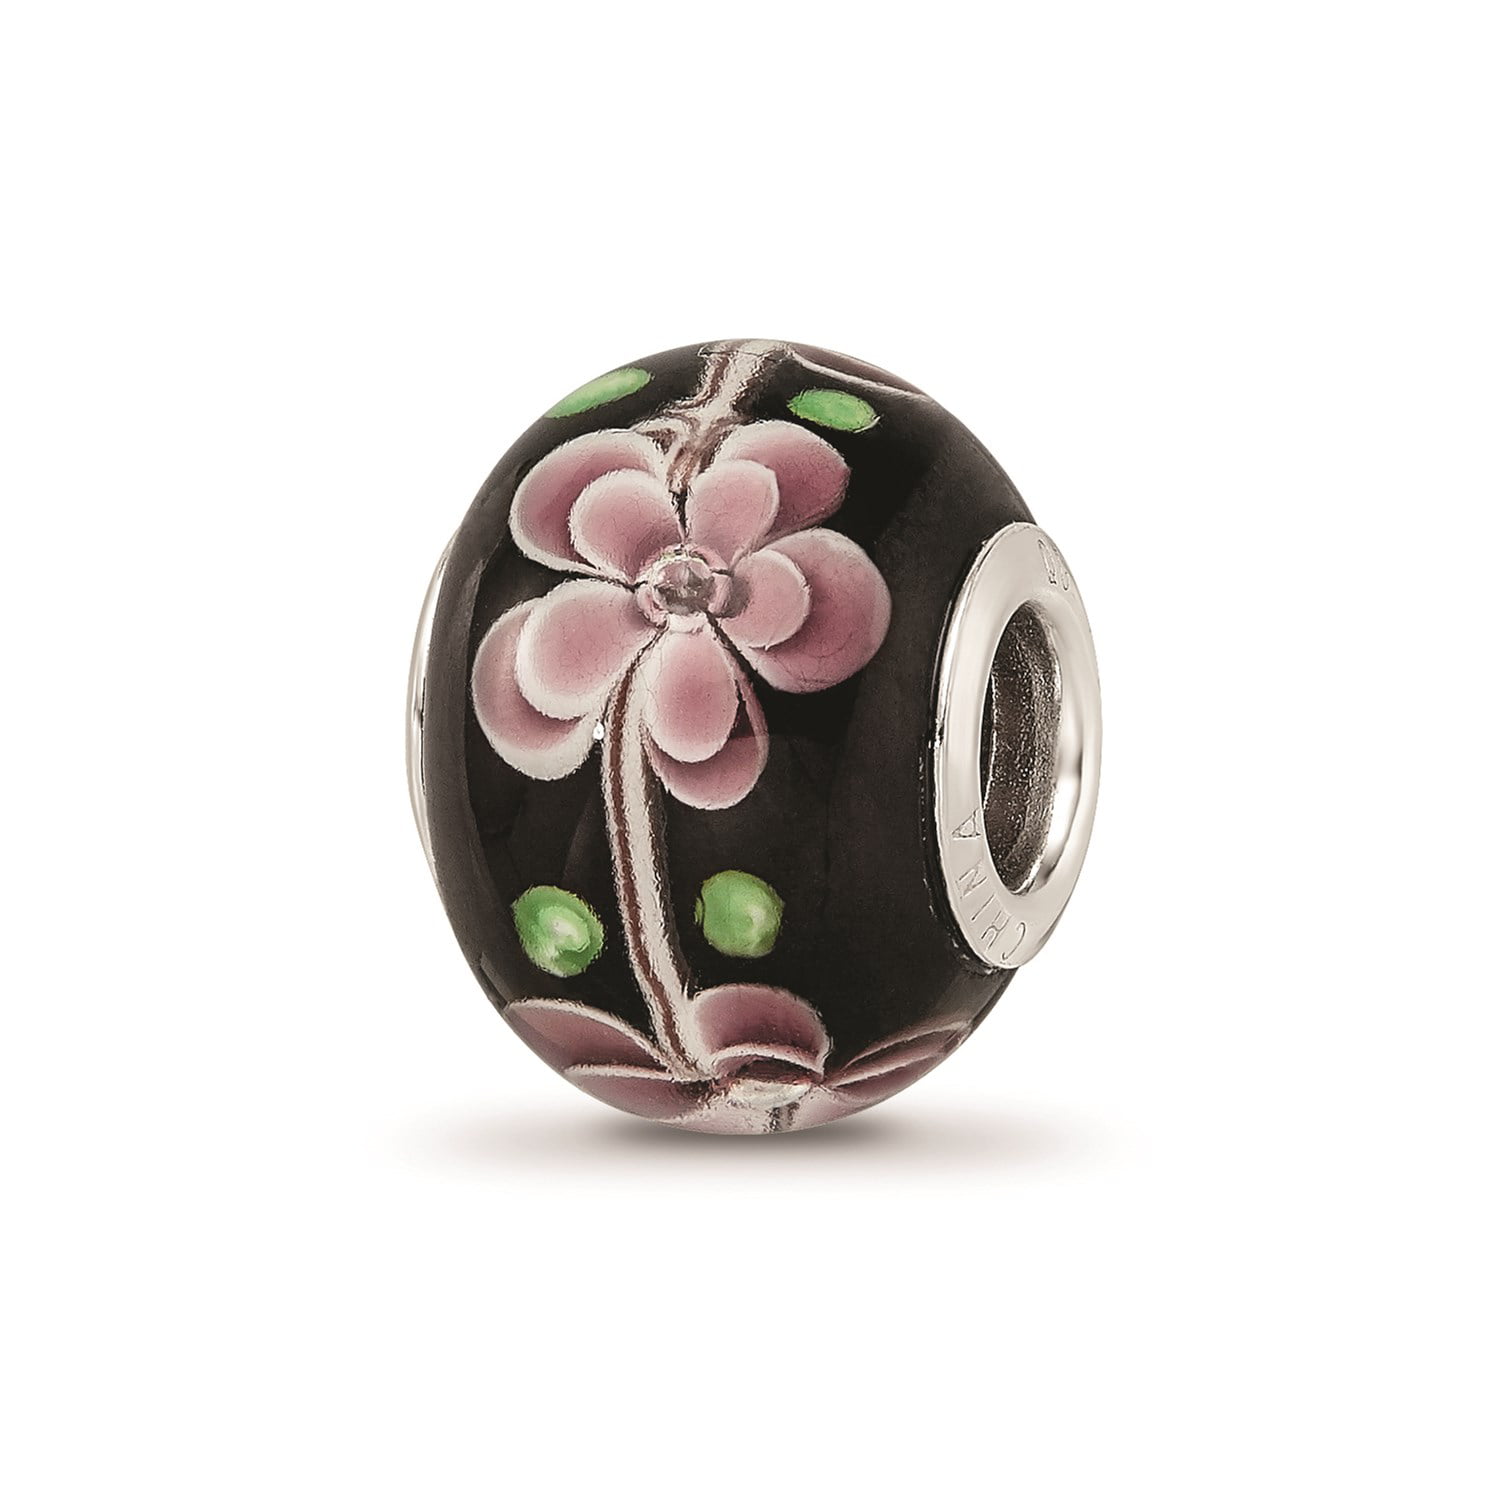 Reflection Beads Sterling Silver Pink and Black Glass Bead 17 x 12 mm 